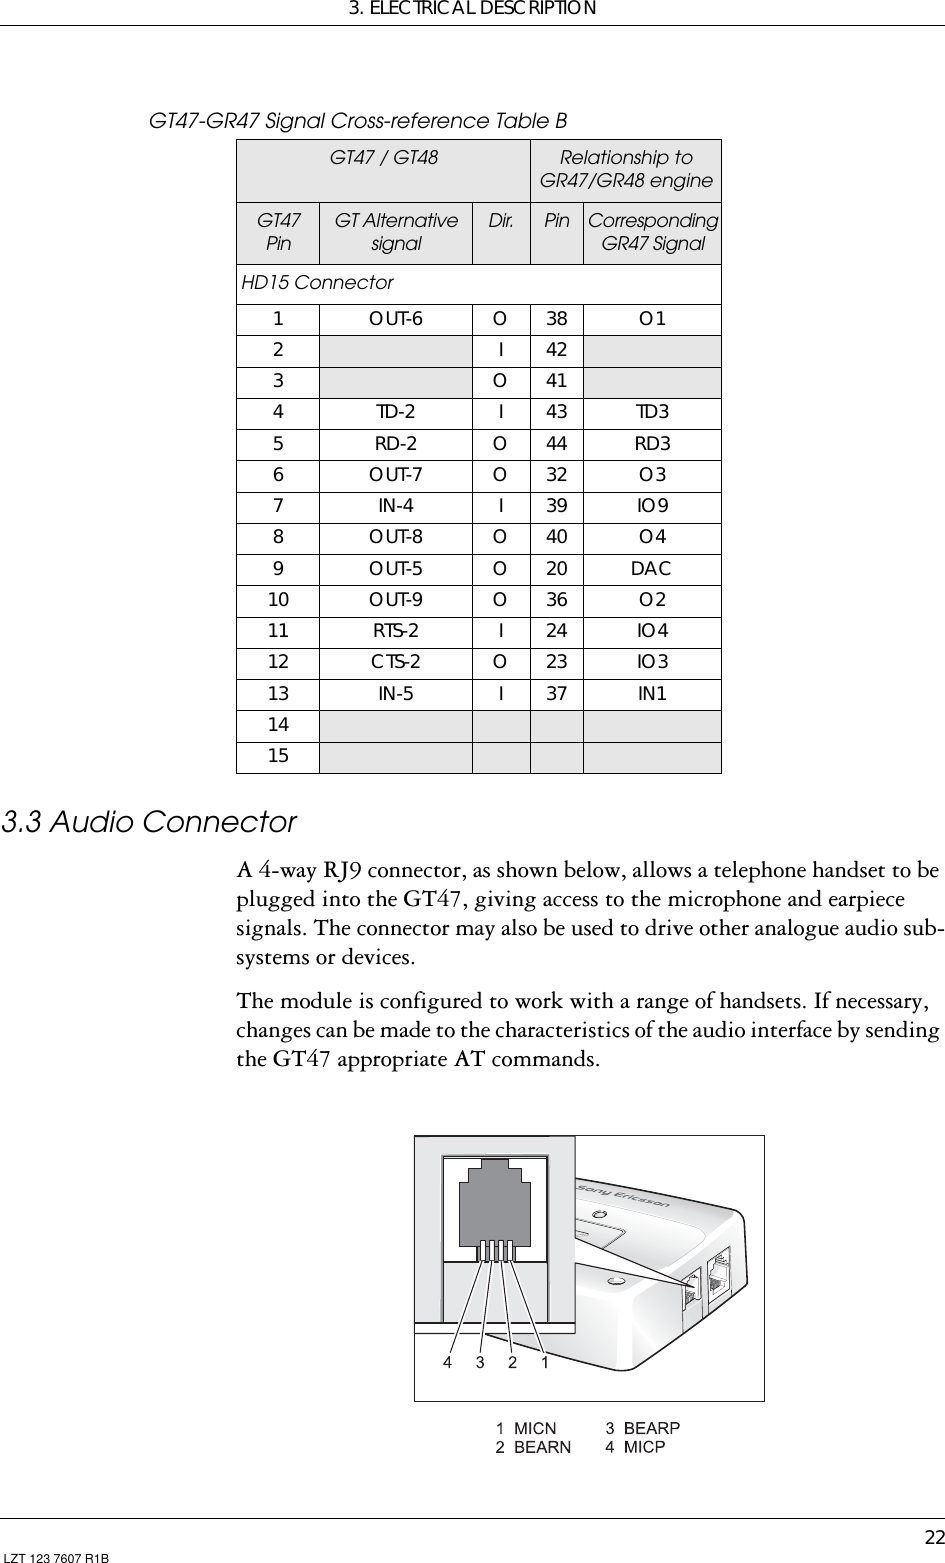 3. ELECTRICAL DESCRIPTION22 LZT 123 7607 R1BGT47-GR47 Signal Cross-reference Table B3.3 Audio ConnectorA 4-way RJ9 connector, as shown below, allows a telephone handset to be plugged into the GT47, giving access to the microphone and earpiece signals. The connector may also be used to drive other analogue audio sub-systems or devices.The module is configured to work with a range of handsets. If necessary, changes can be made to the characteristics of the audio interface by sending the GT47 appropriate AT commands.GT47 / GT48 Relationship to GR47/GR48 engineGT47 PinGT Alternative signal Dir. Pin Corresponding GR47 SignalHD15 Connector1OUT-6 O38 O12 I 423 O 414TD-2 I43 TD35RD-2 O44 RD36OUT-7 O32 O37IN-4 I39 IO98OUT-8 O40 O49OUT-5 O20 DAC10 OUT-9 O36 O211 RTS-2 I24 IO412 CTS-2 O23 IO313 IN-5 I37 IN11415